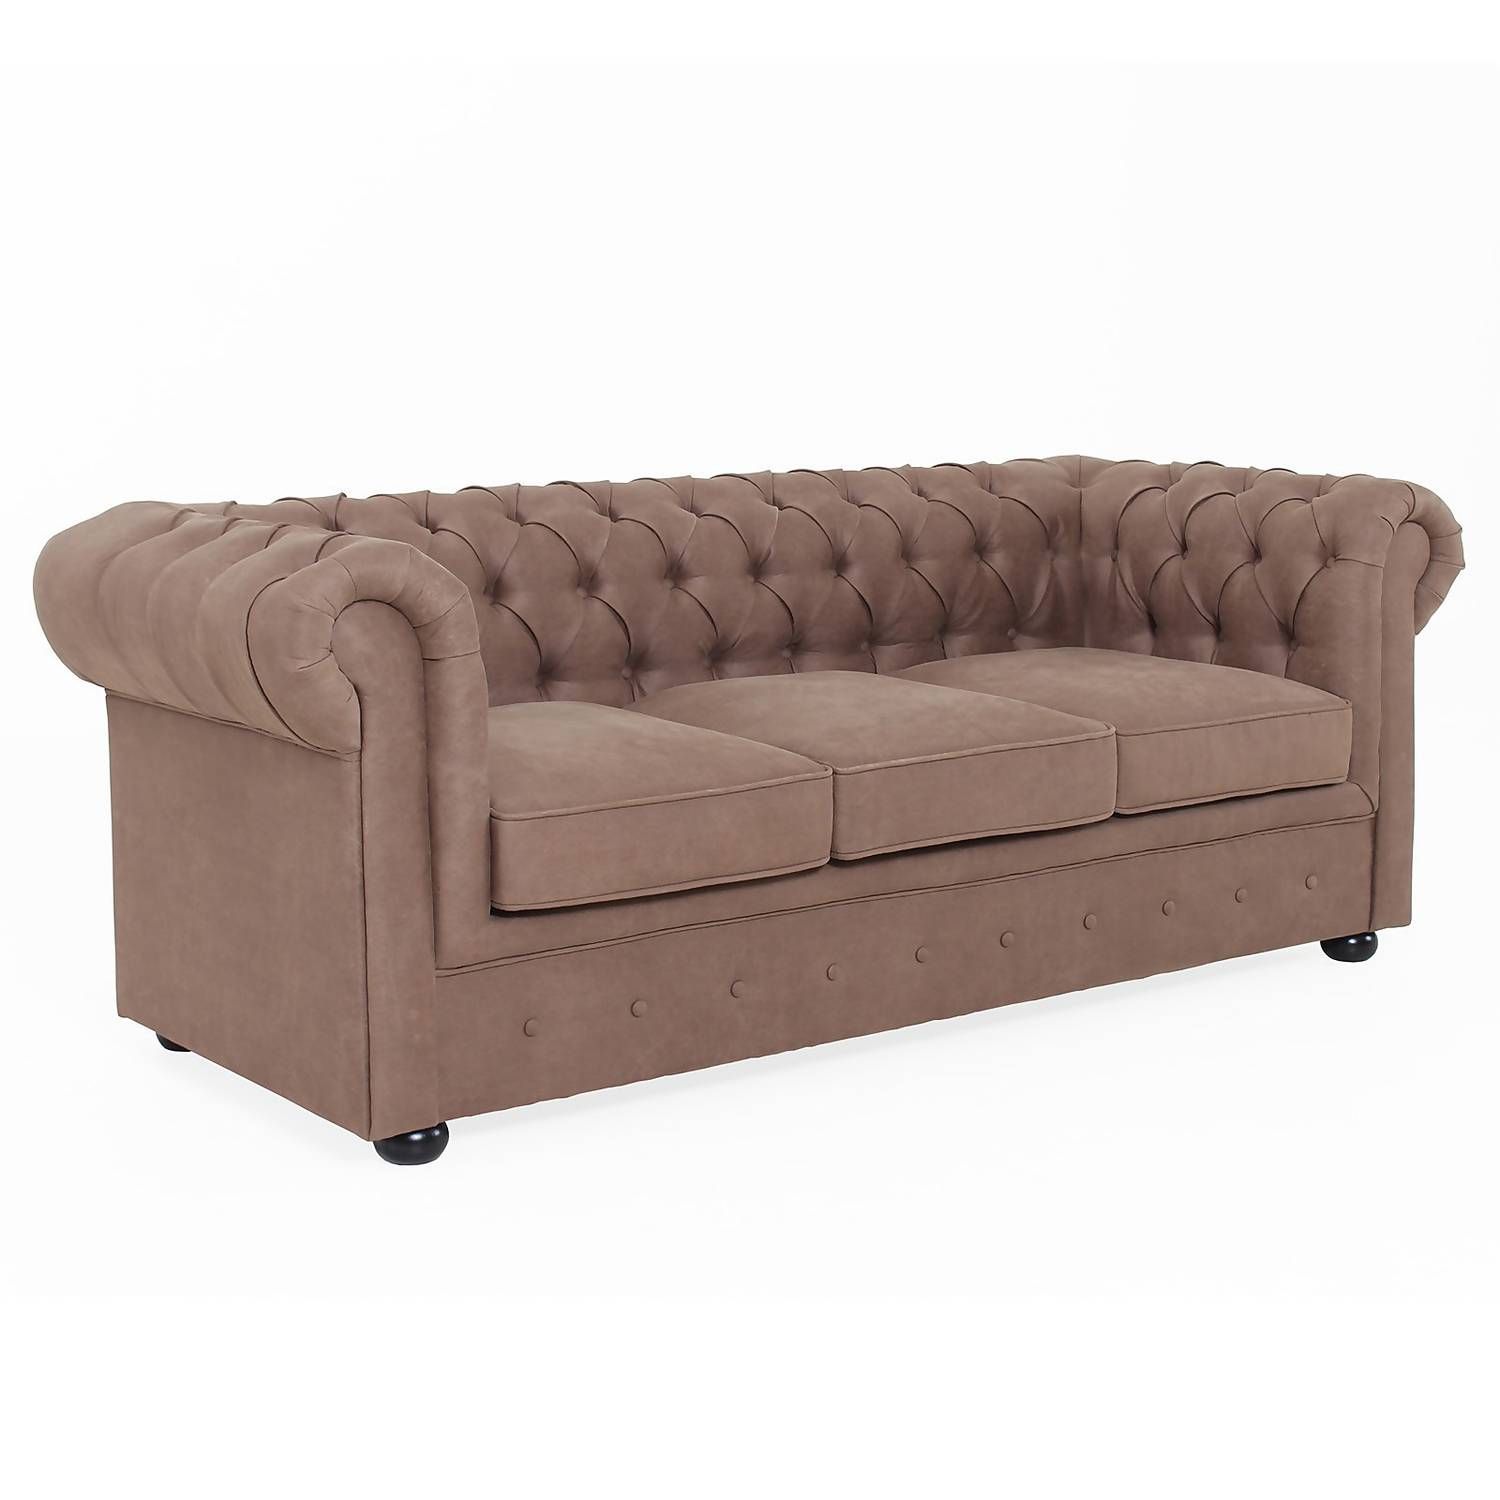 Chesterfield Faux Leather 3 Seater Sofa – Tan | Homebase Regarding Traditional 3 Seater Faux Leather Sofas (Photo 14 of 15)